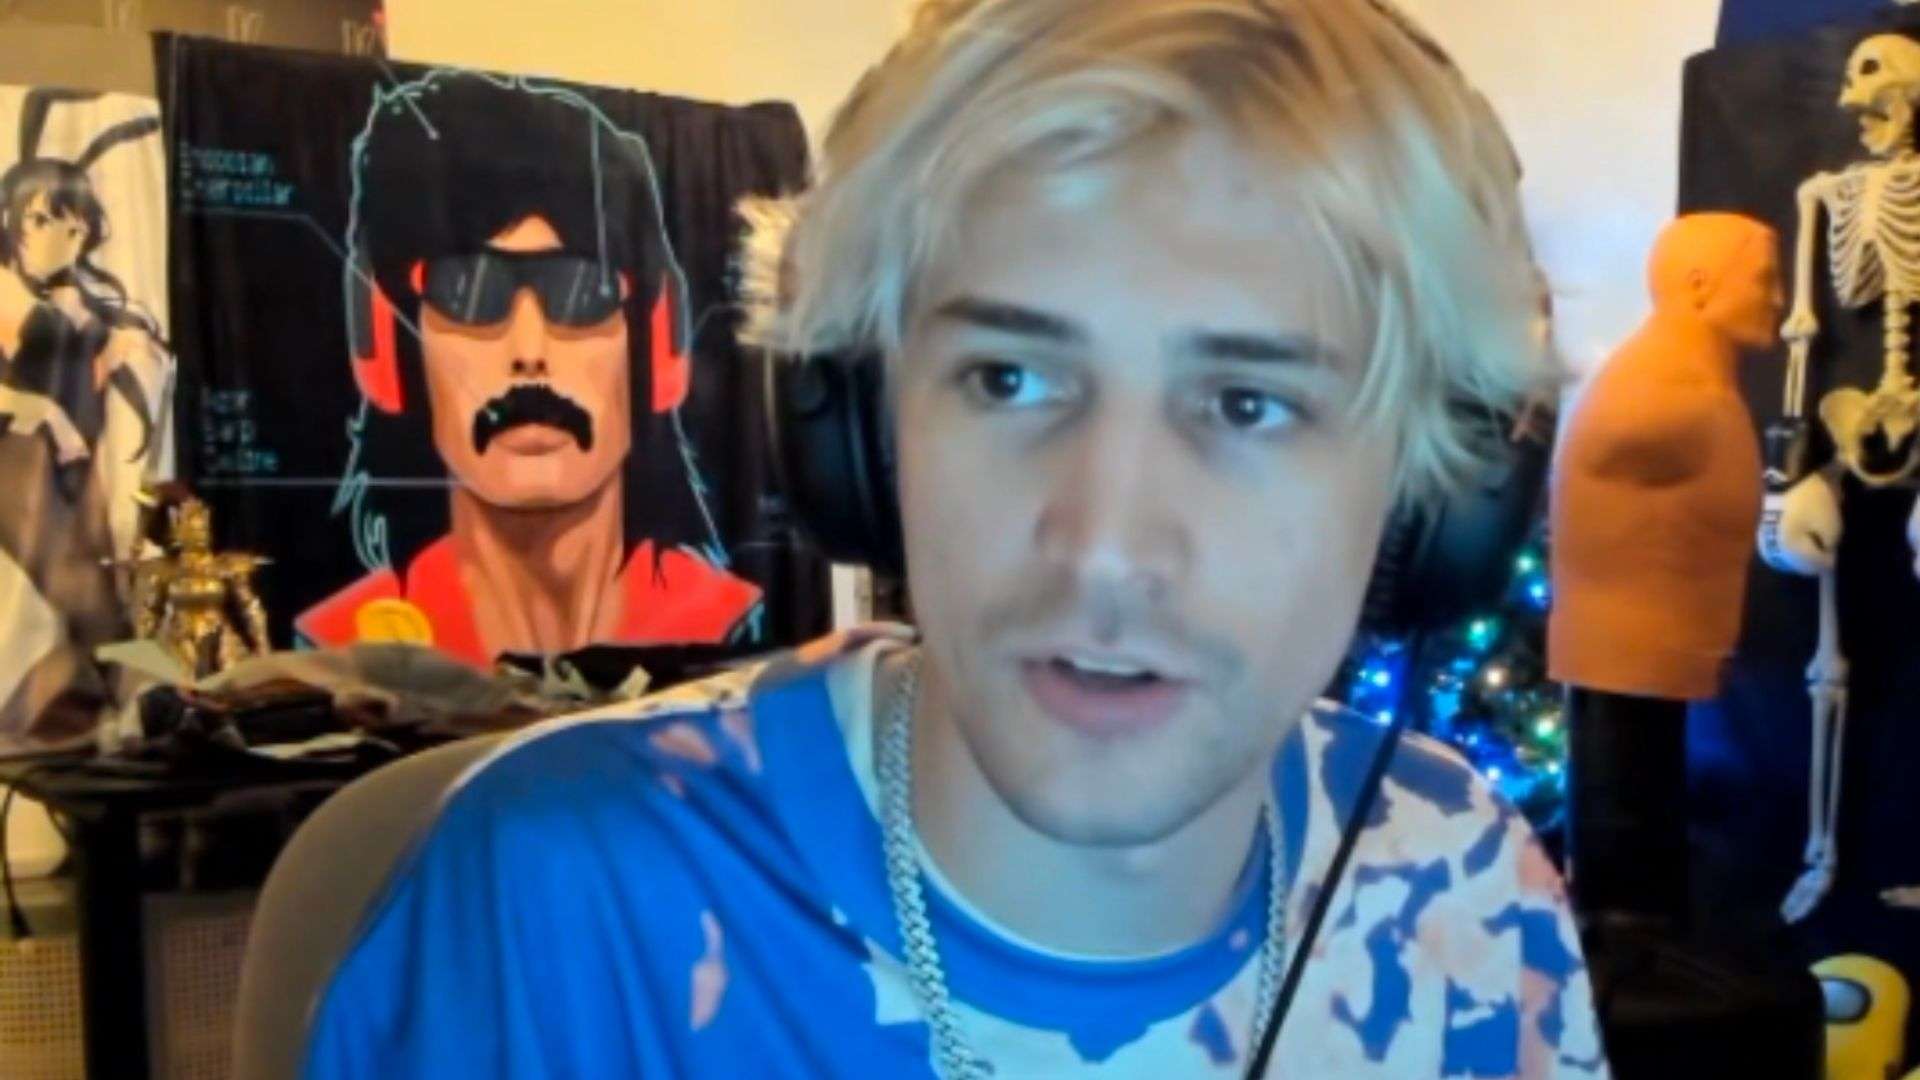 xQc in blue and white shirt in front of dr disrespect blanket looking at camera